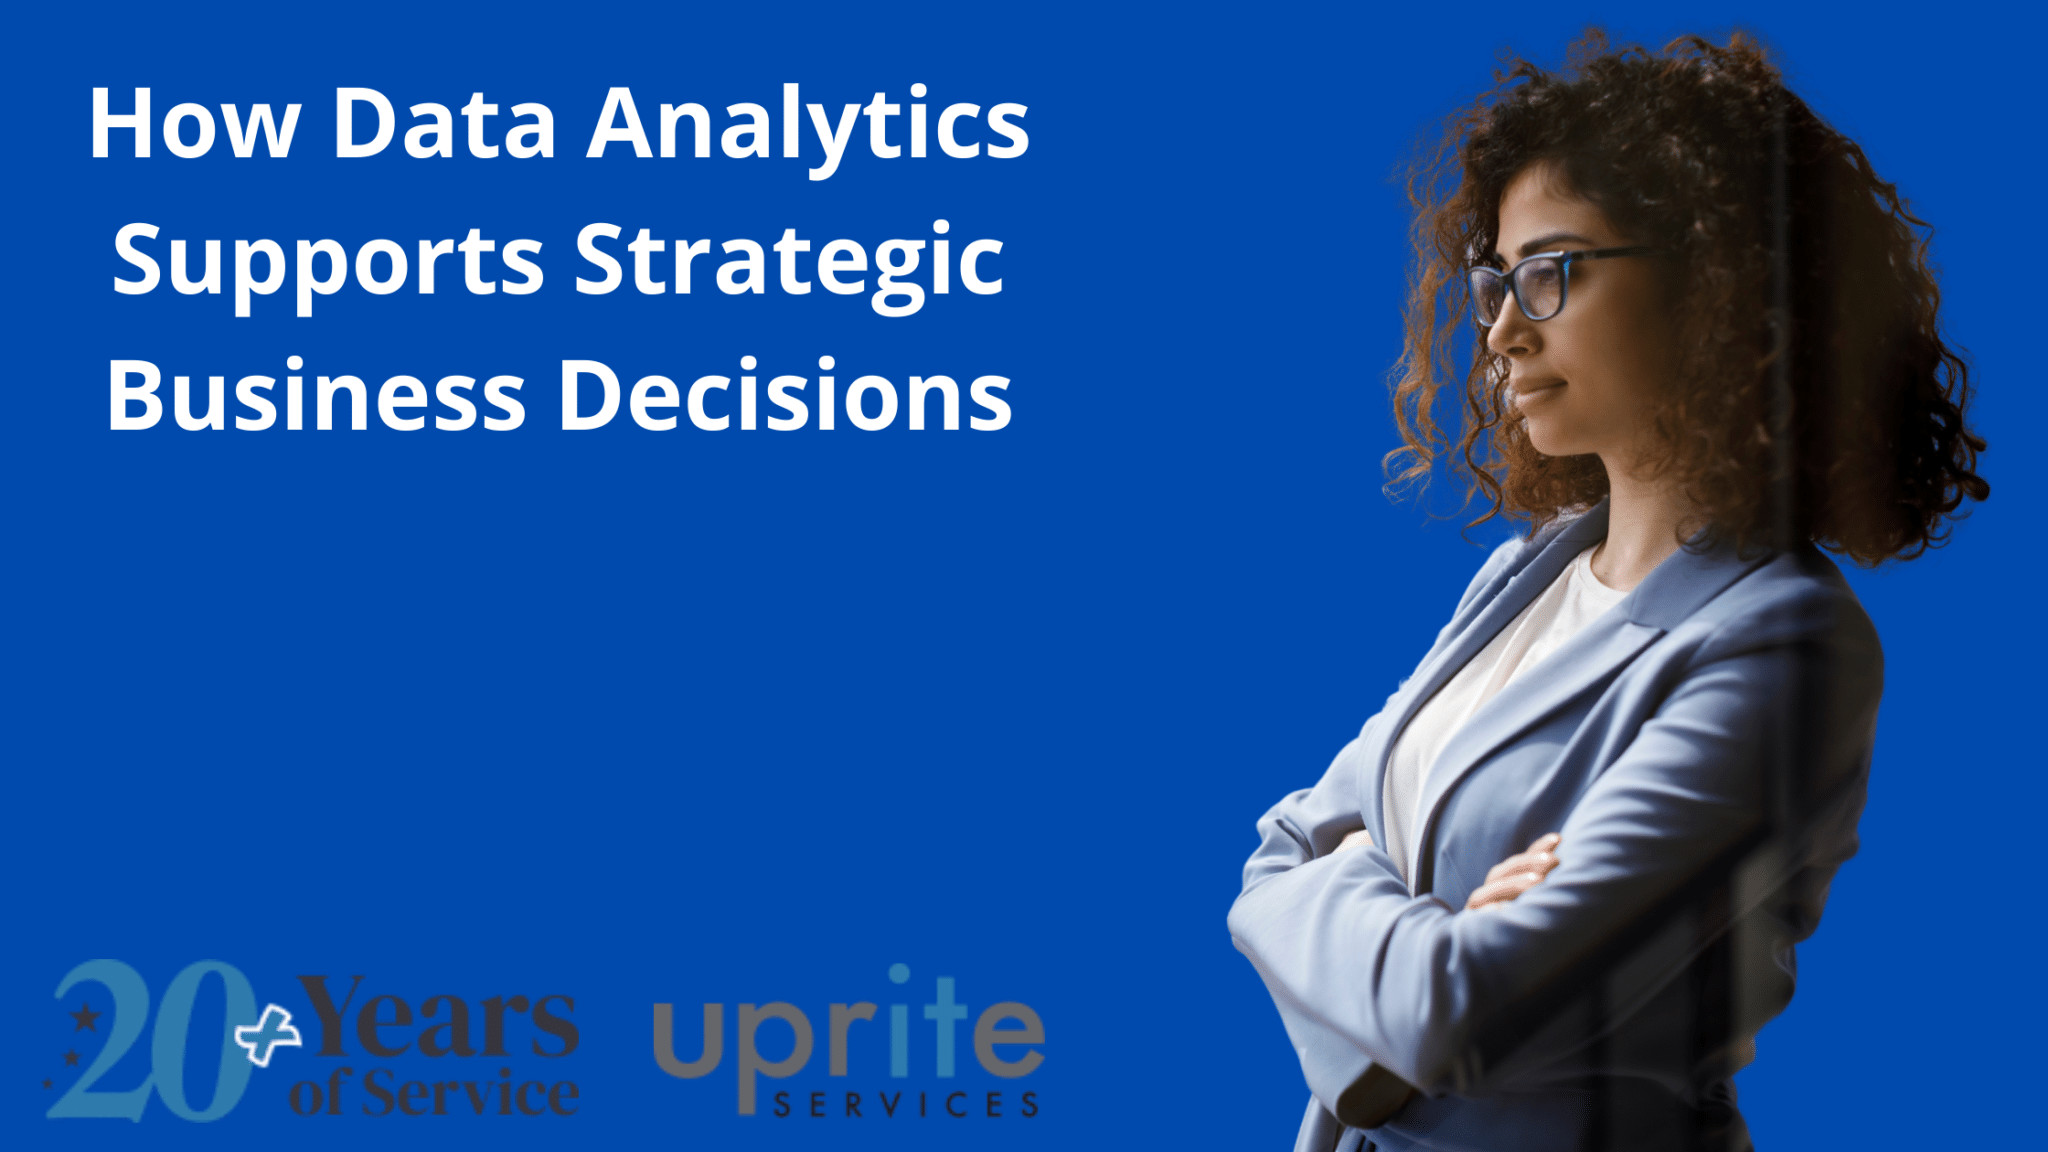 How Data Analytics Supports Strategic Business Decisions